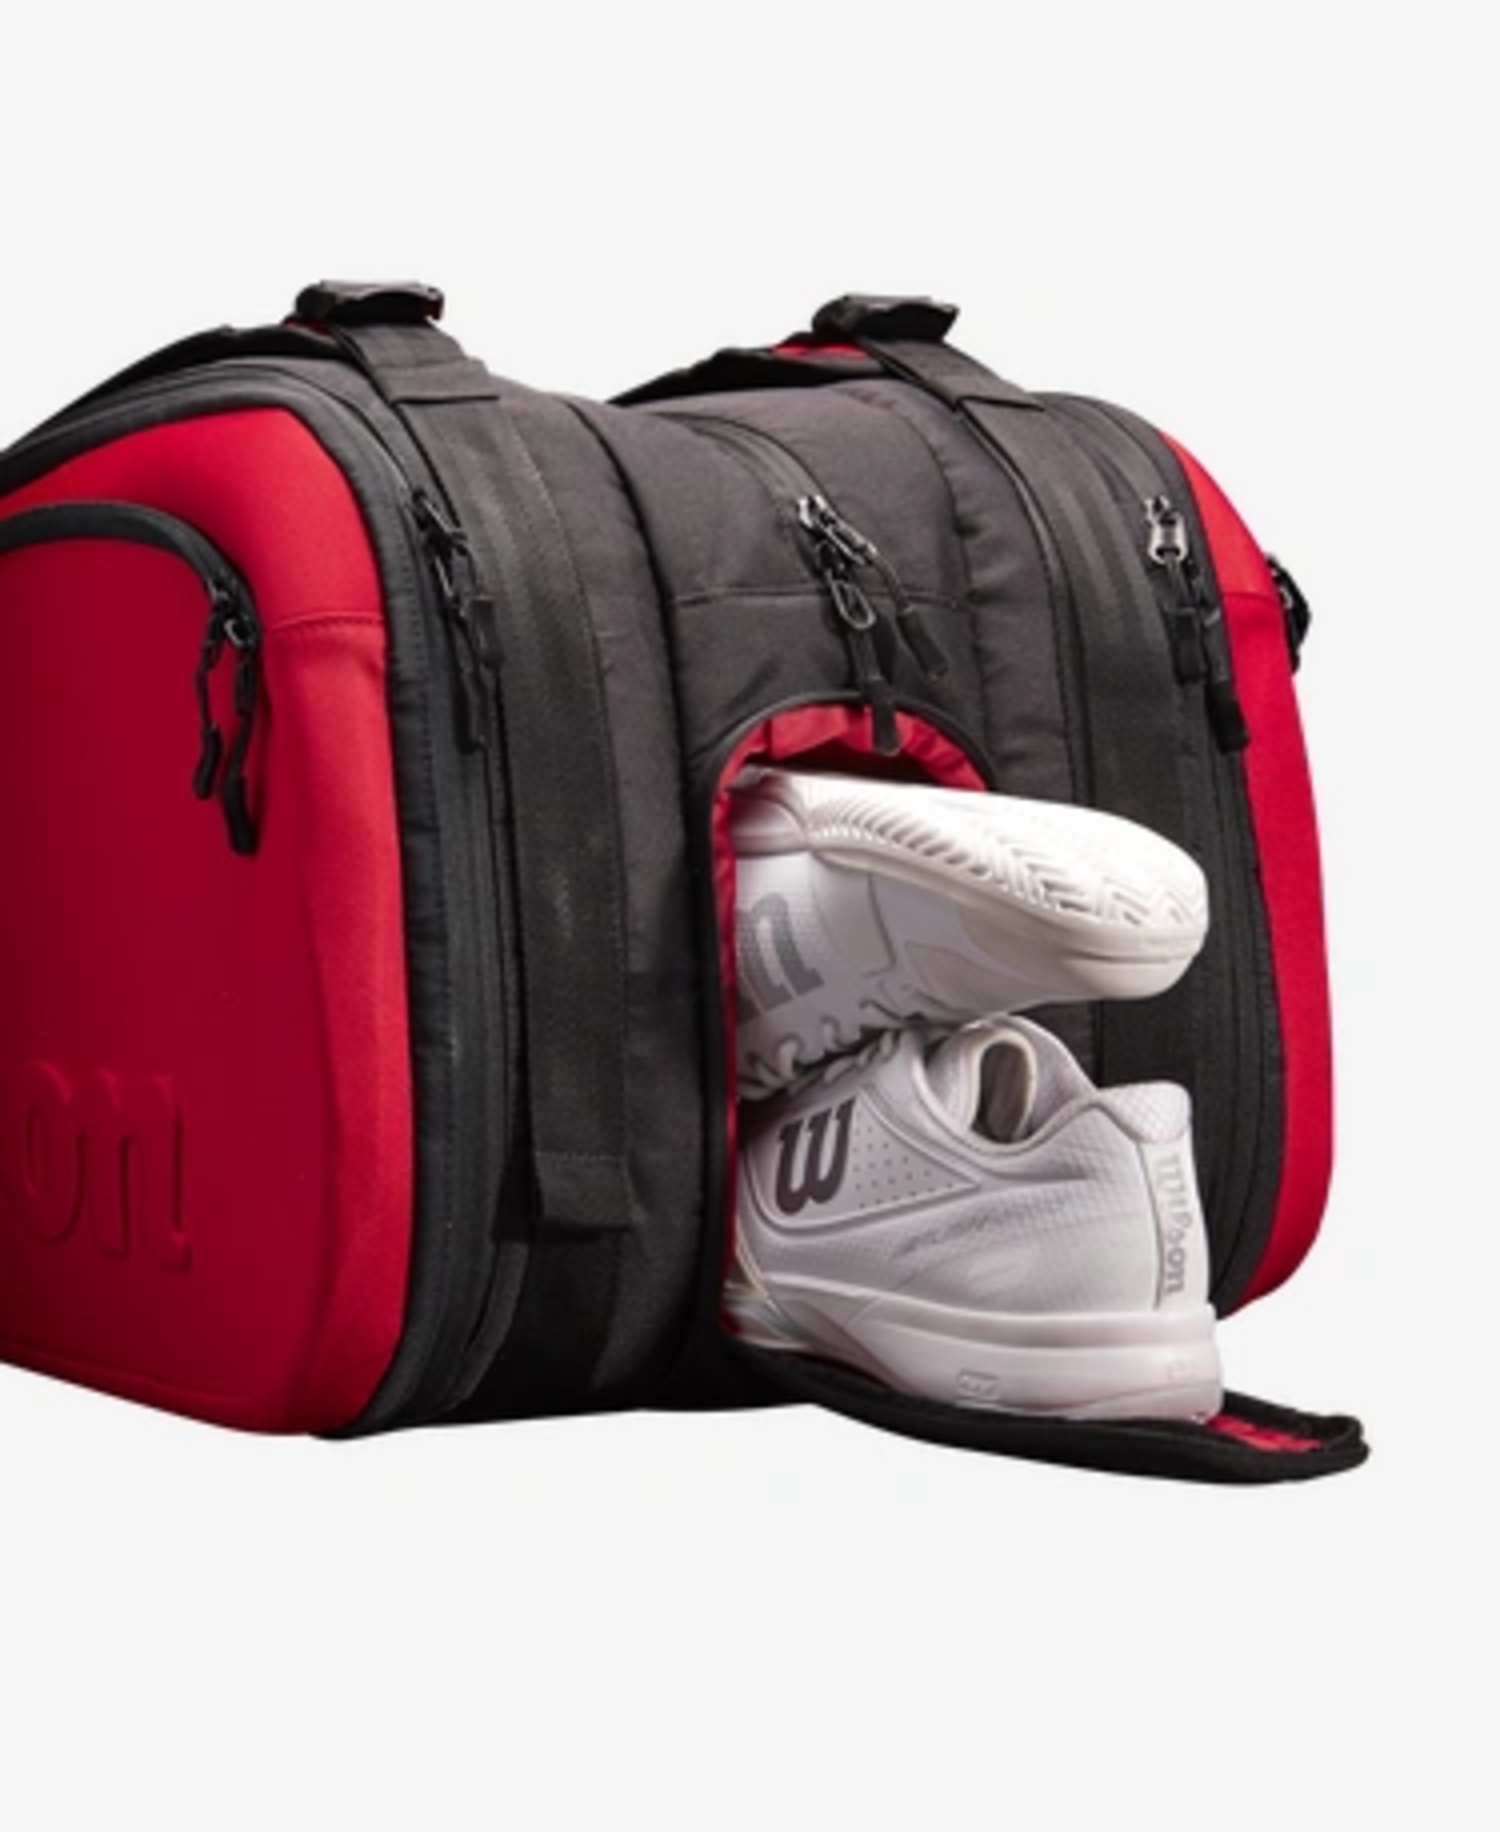 Super Tour Pro Staff v14 Backpack - Tennis Topia - Best Sale Prices and  Service in Tennis